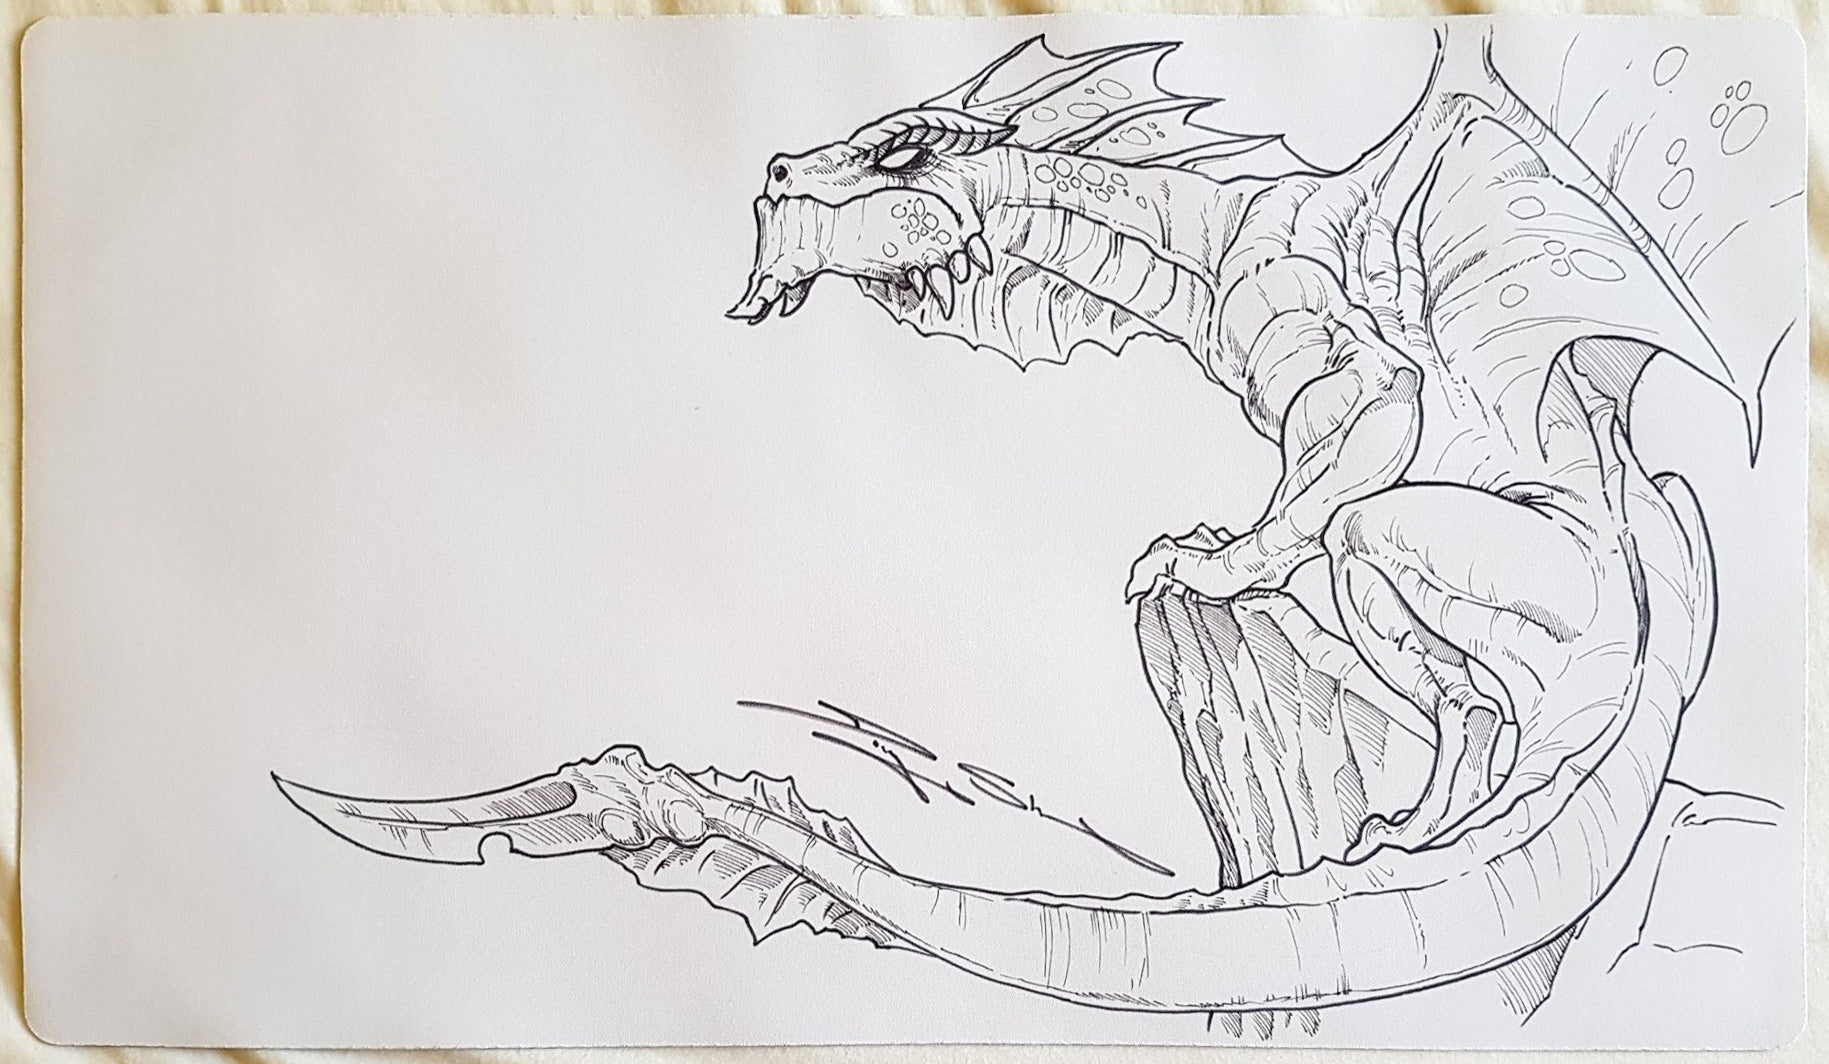 Dragon by Shuler - Hand Drawn & Signed by Artist - MTG Playmat